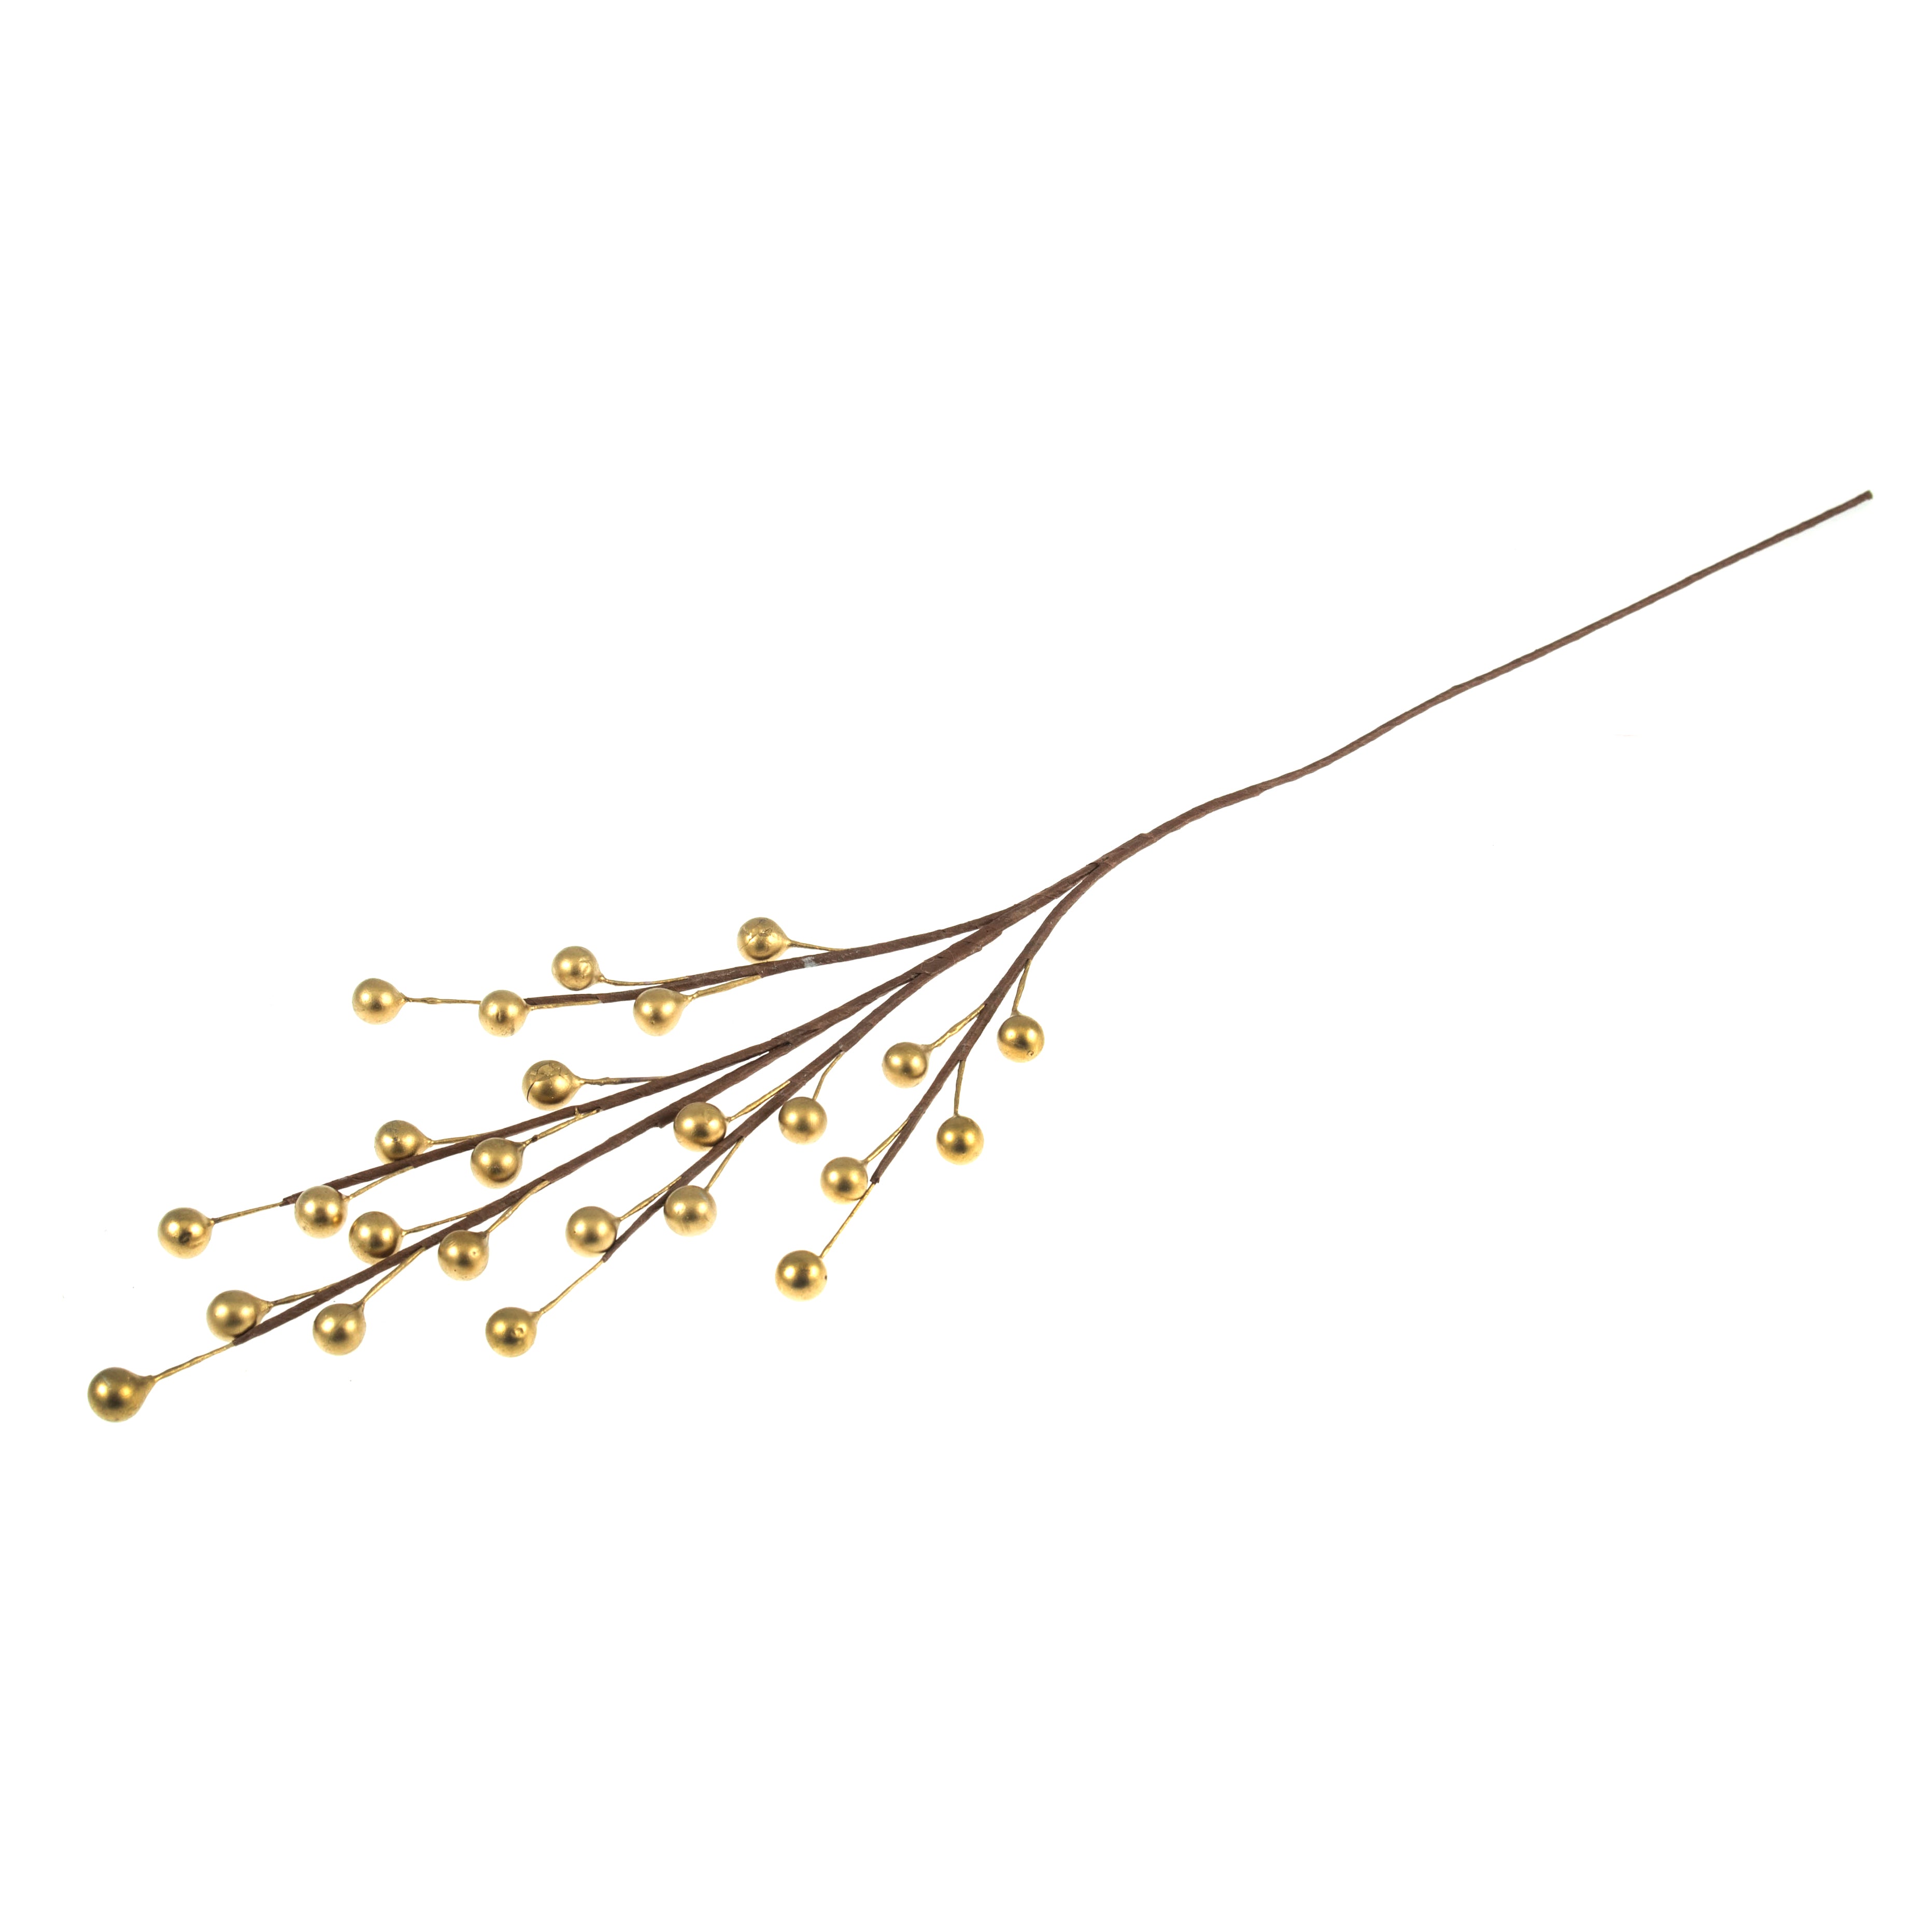 Large Berry Branch: 1 Piece: Gold or Silver